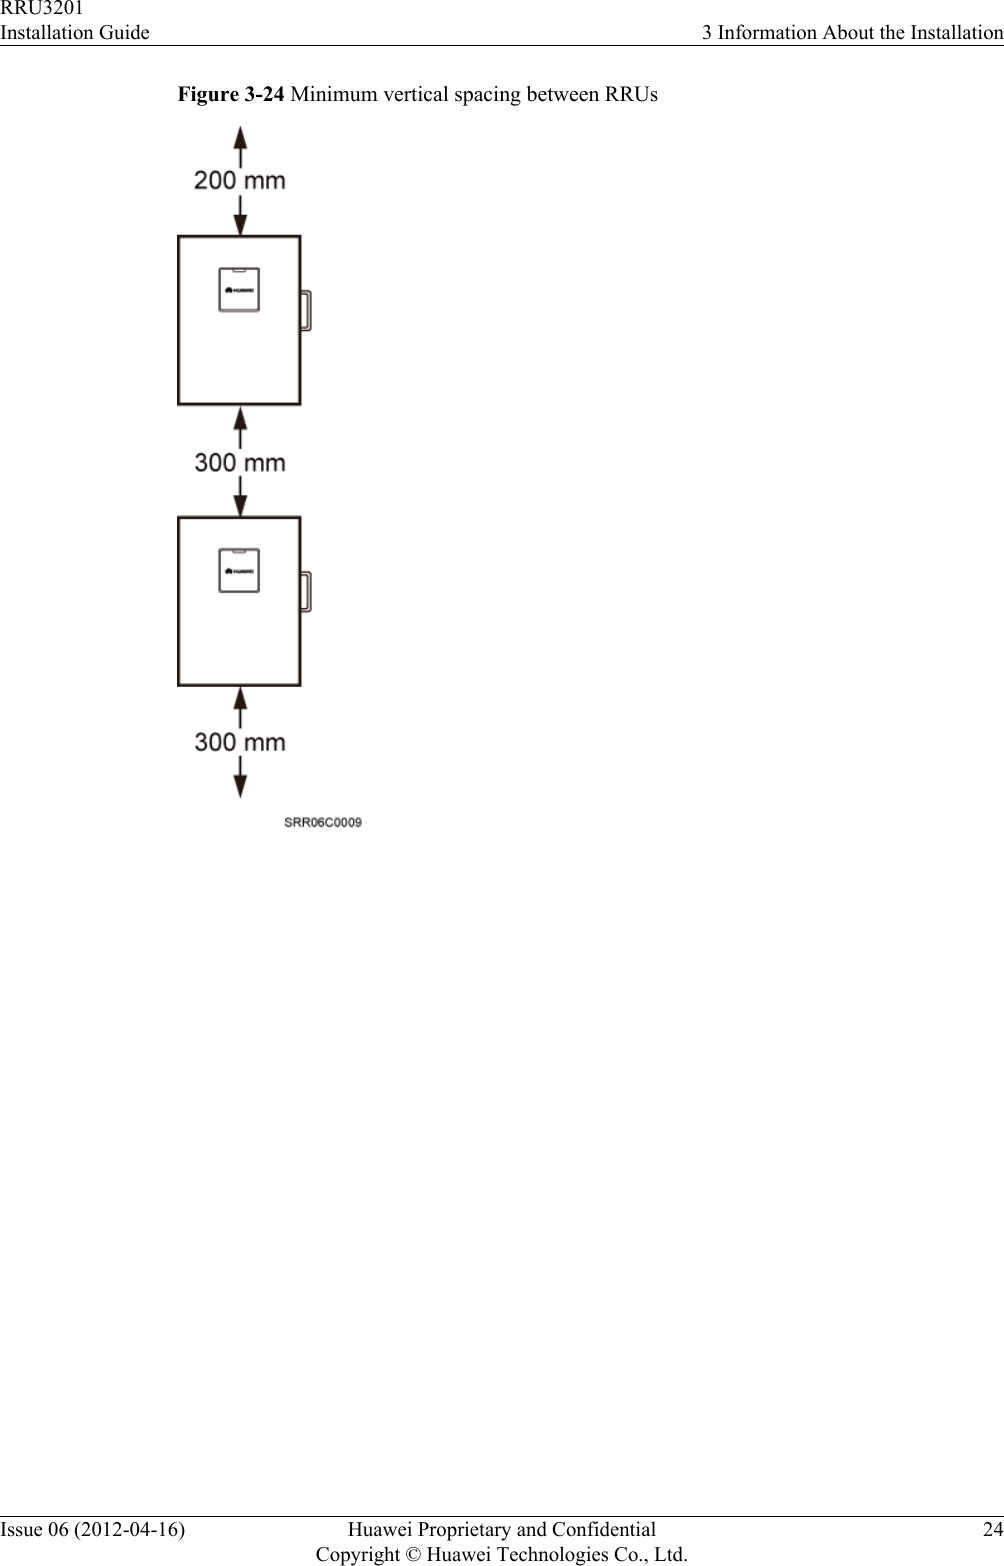 Figure 3-24 Minimum vertical spacing between RRUsRRU3201Installation Guide 3 Information About the InstallationIssue 06 (2012-04-16) Huawei Proprietary and ConfidentialCopyright © Huawei Technologies Co., Ltd.24